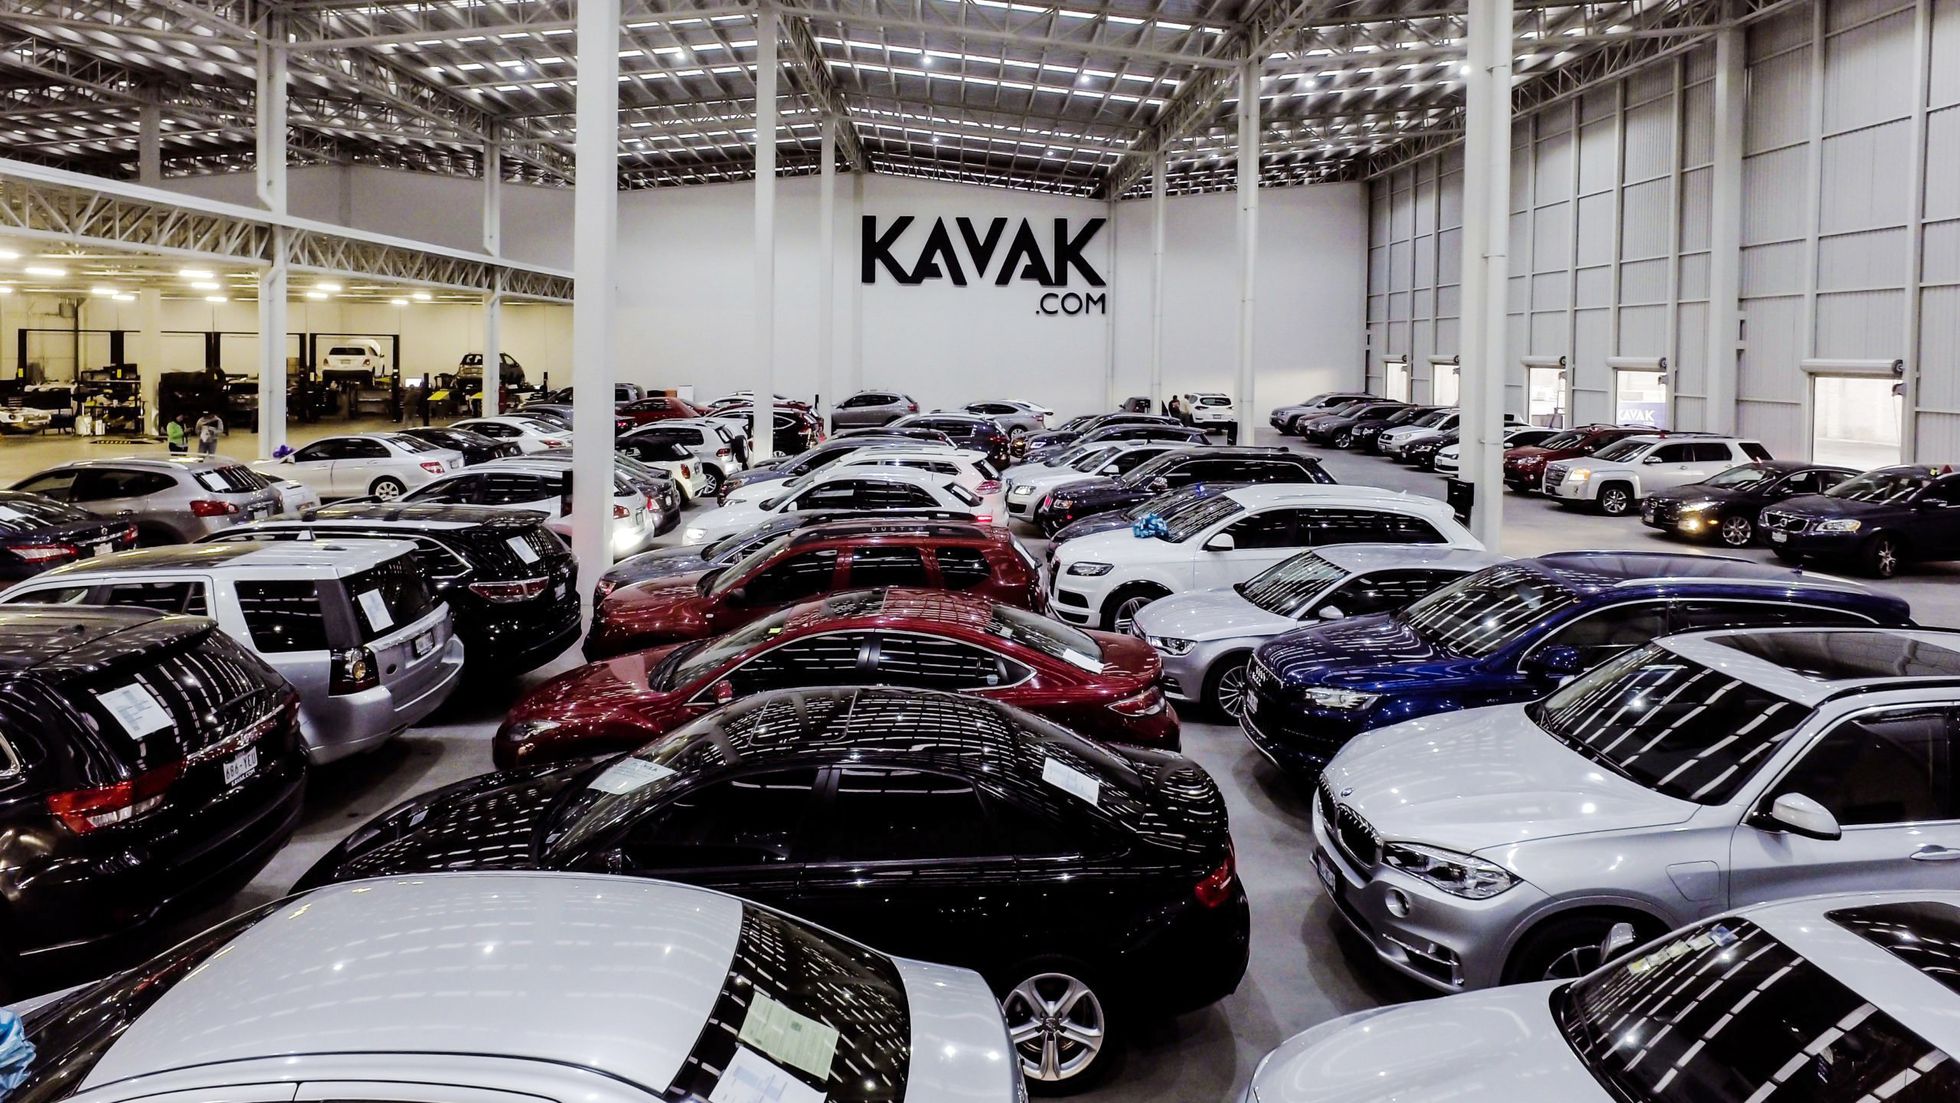 KAVAK starts operations in Brazil with US$480 million investment